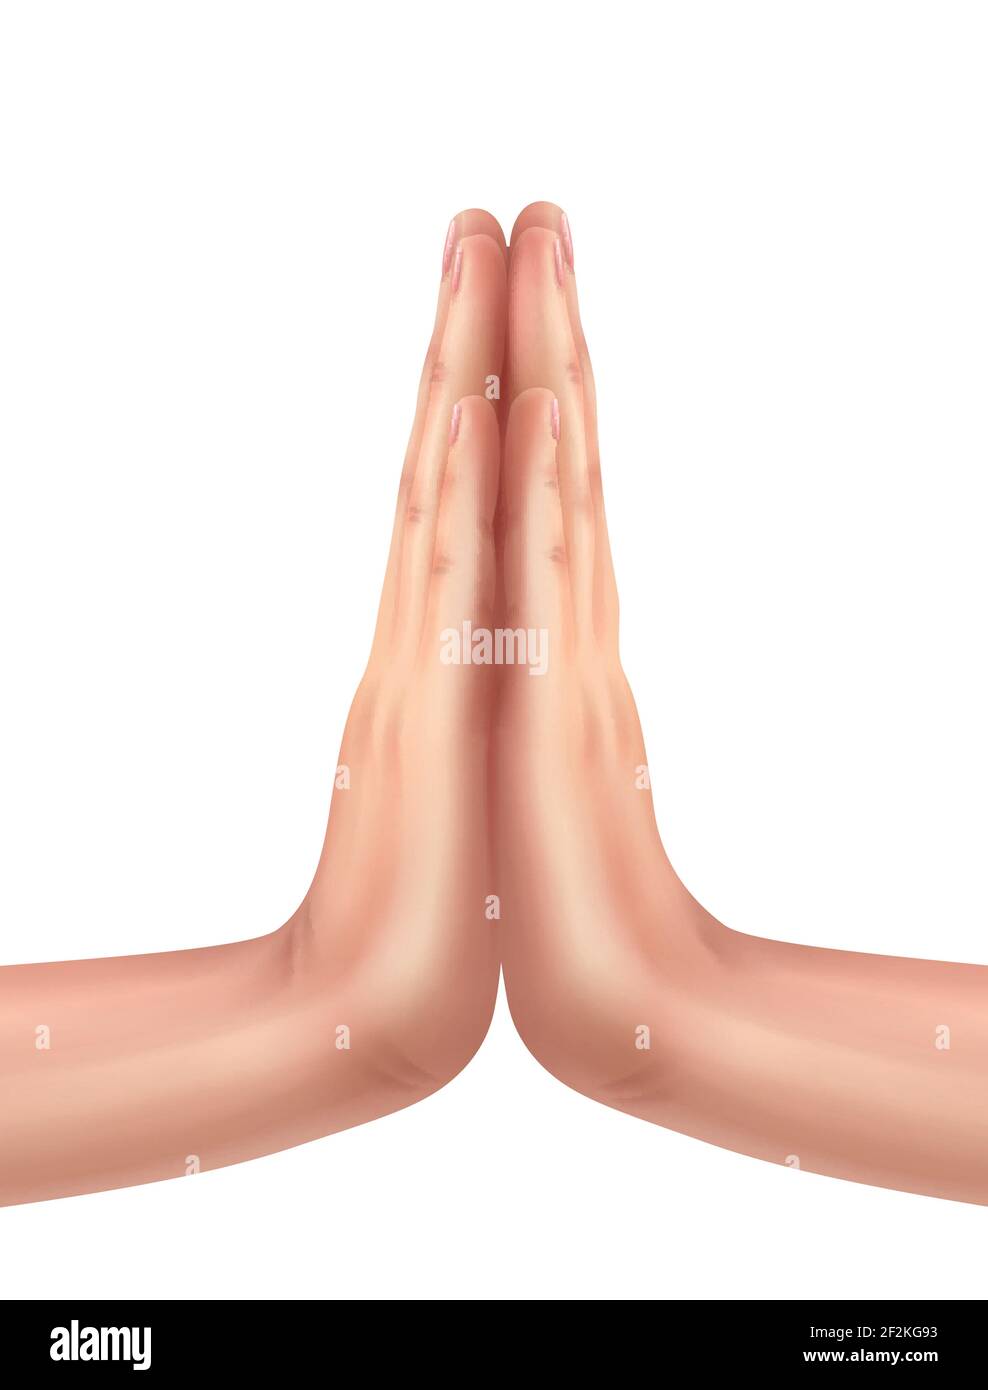 Human put the palms of the hands together in praying isolated on white background. Stock Vector